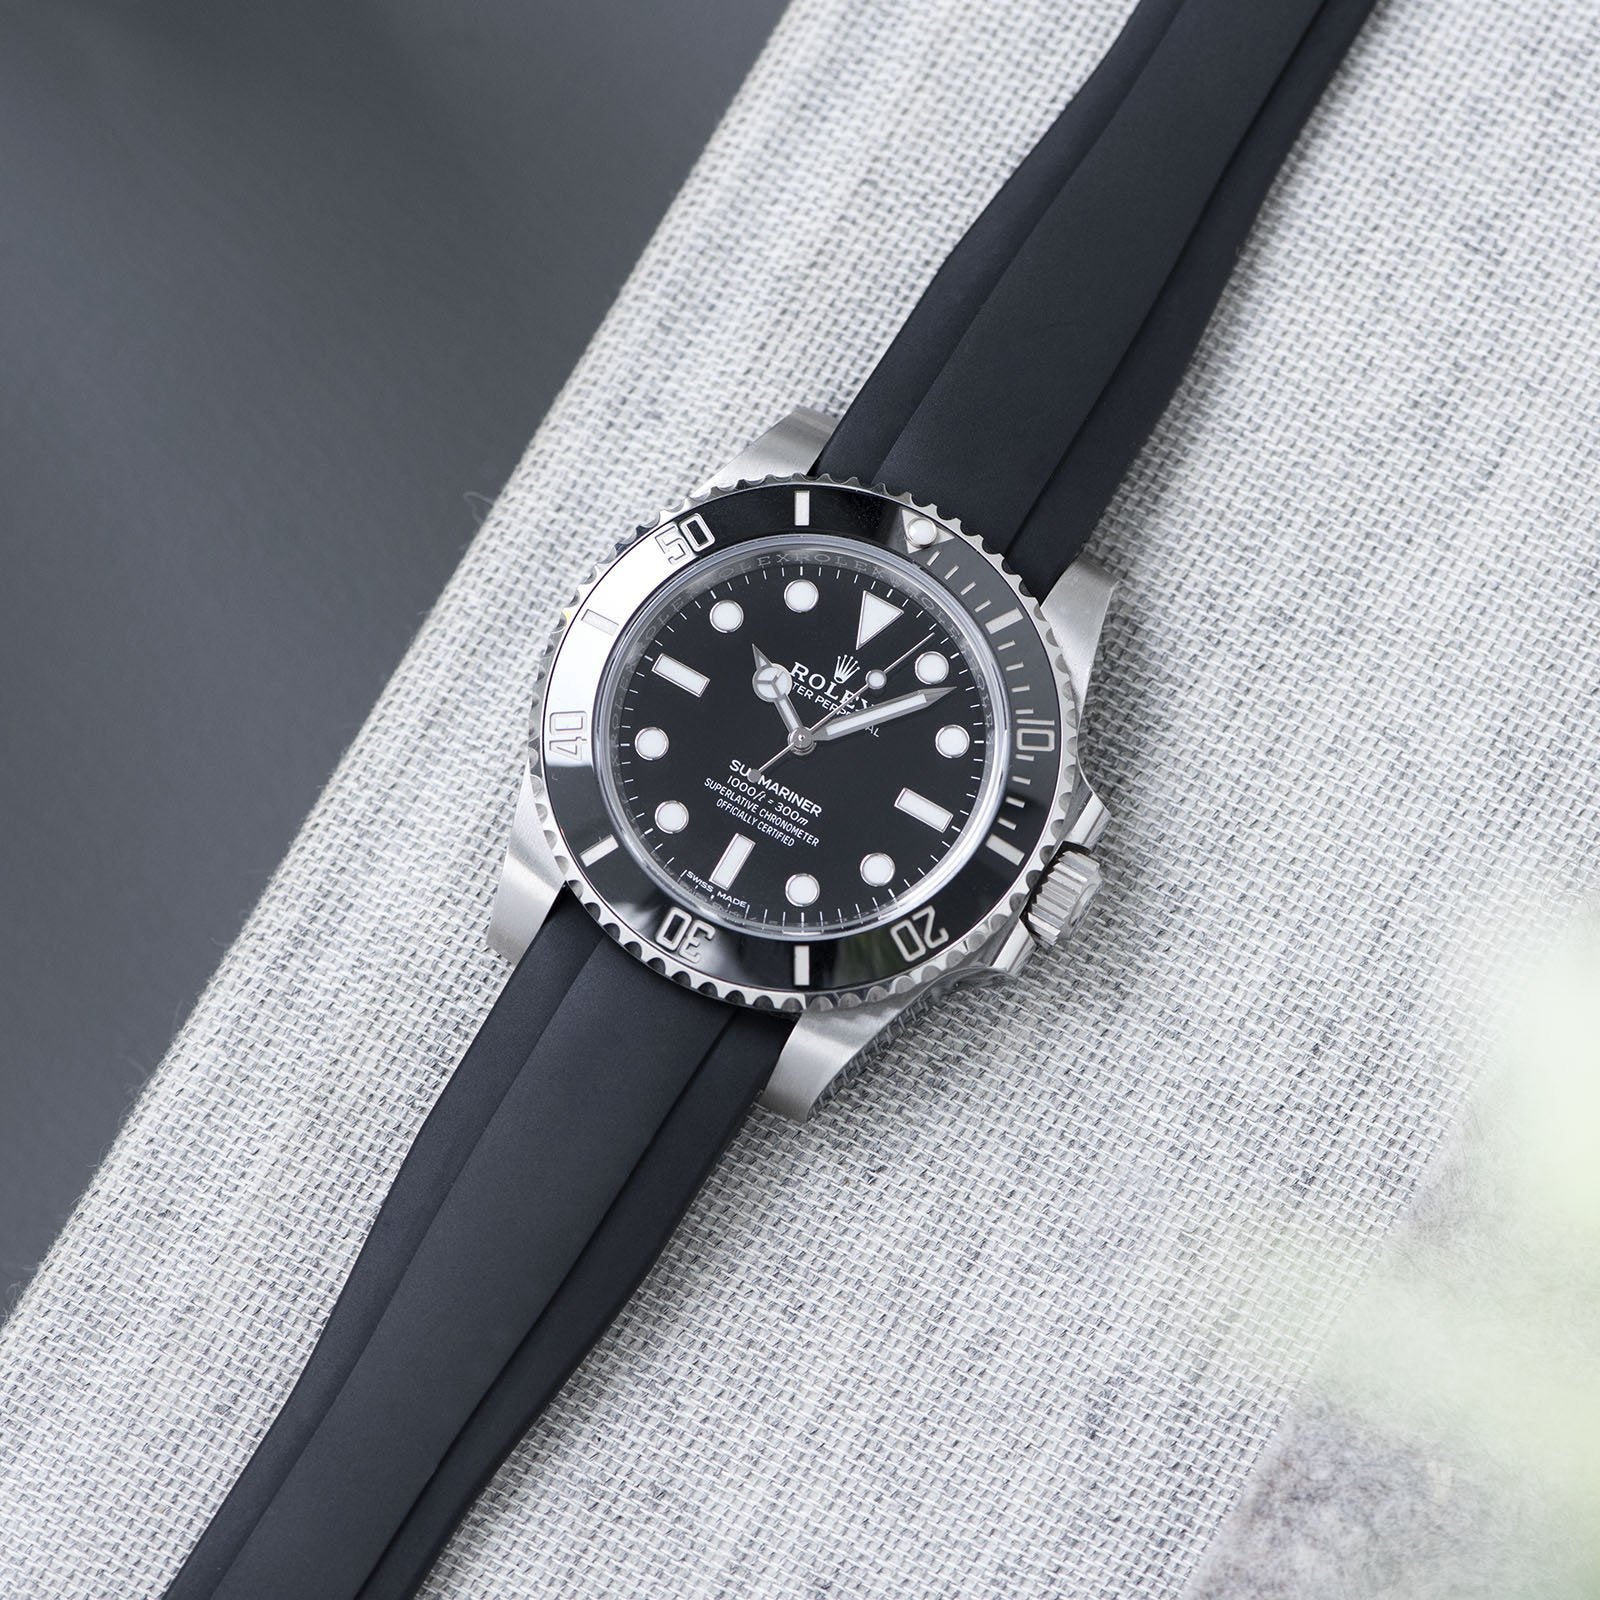 Rubber Strap Rolex Submariner with date Hulk For Deployant